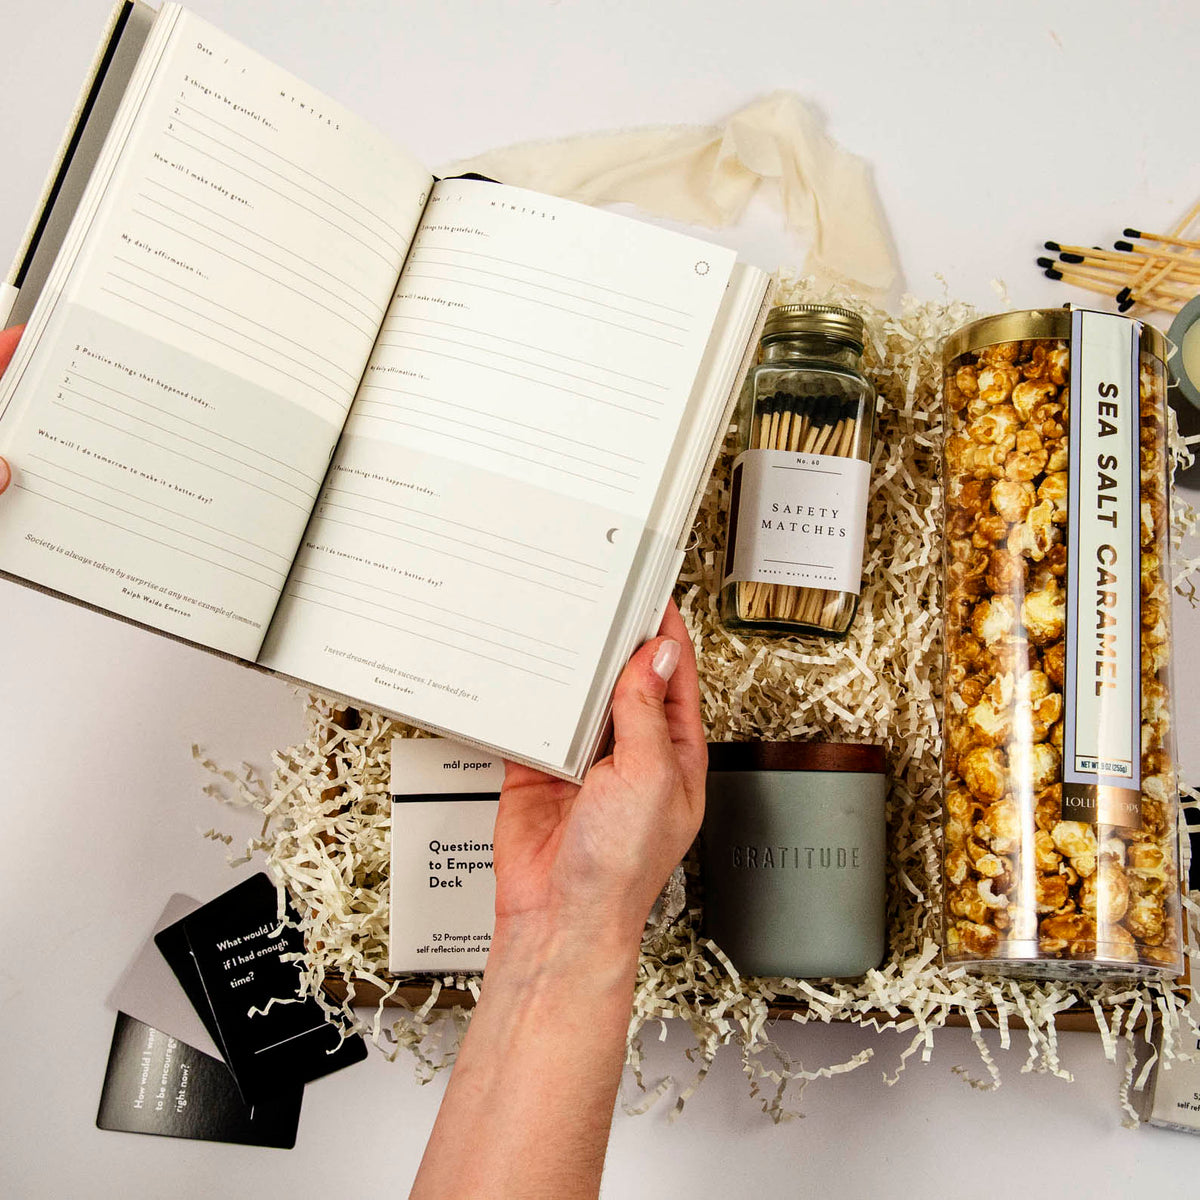 Let Employees Know You Care with Personalized Corporate Gift Sets